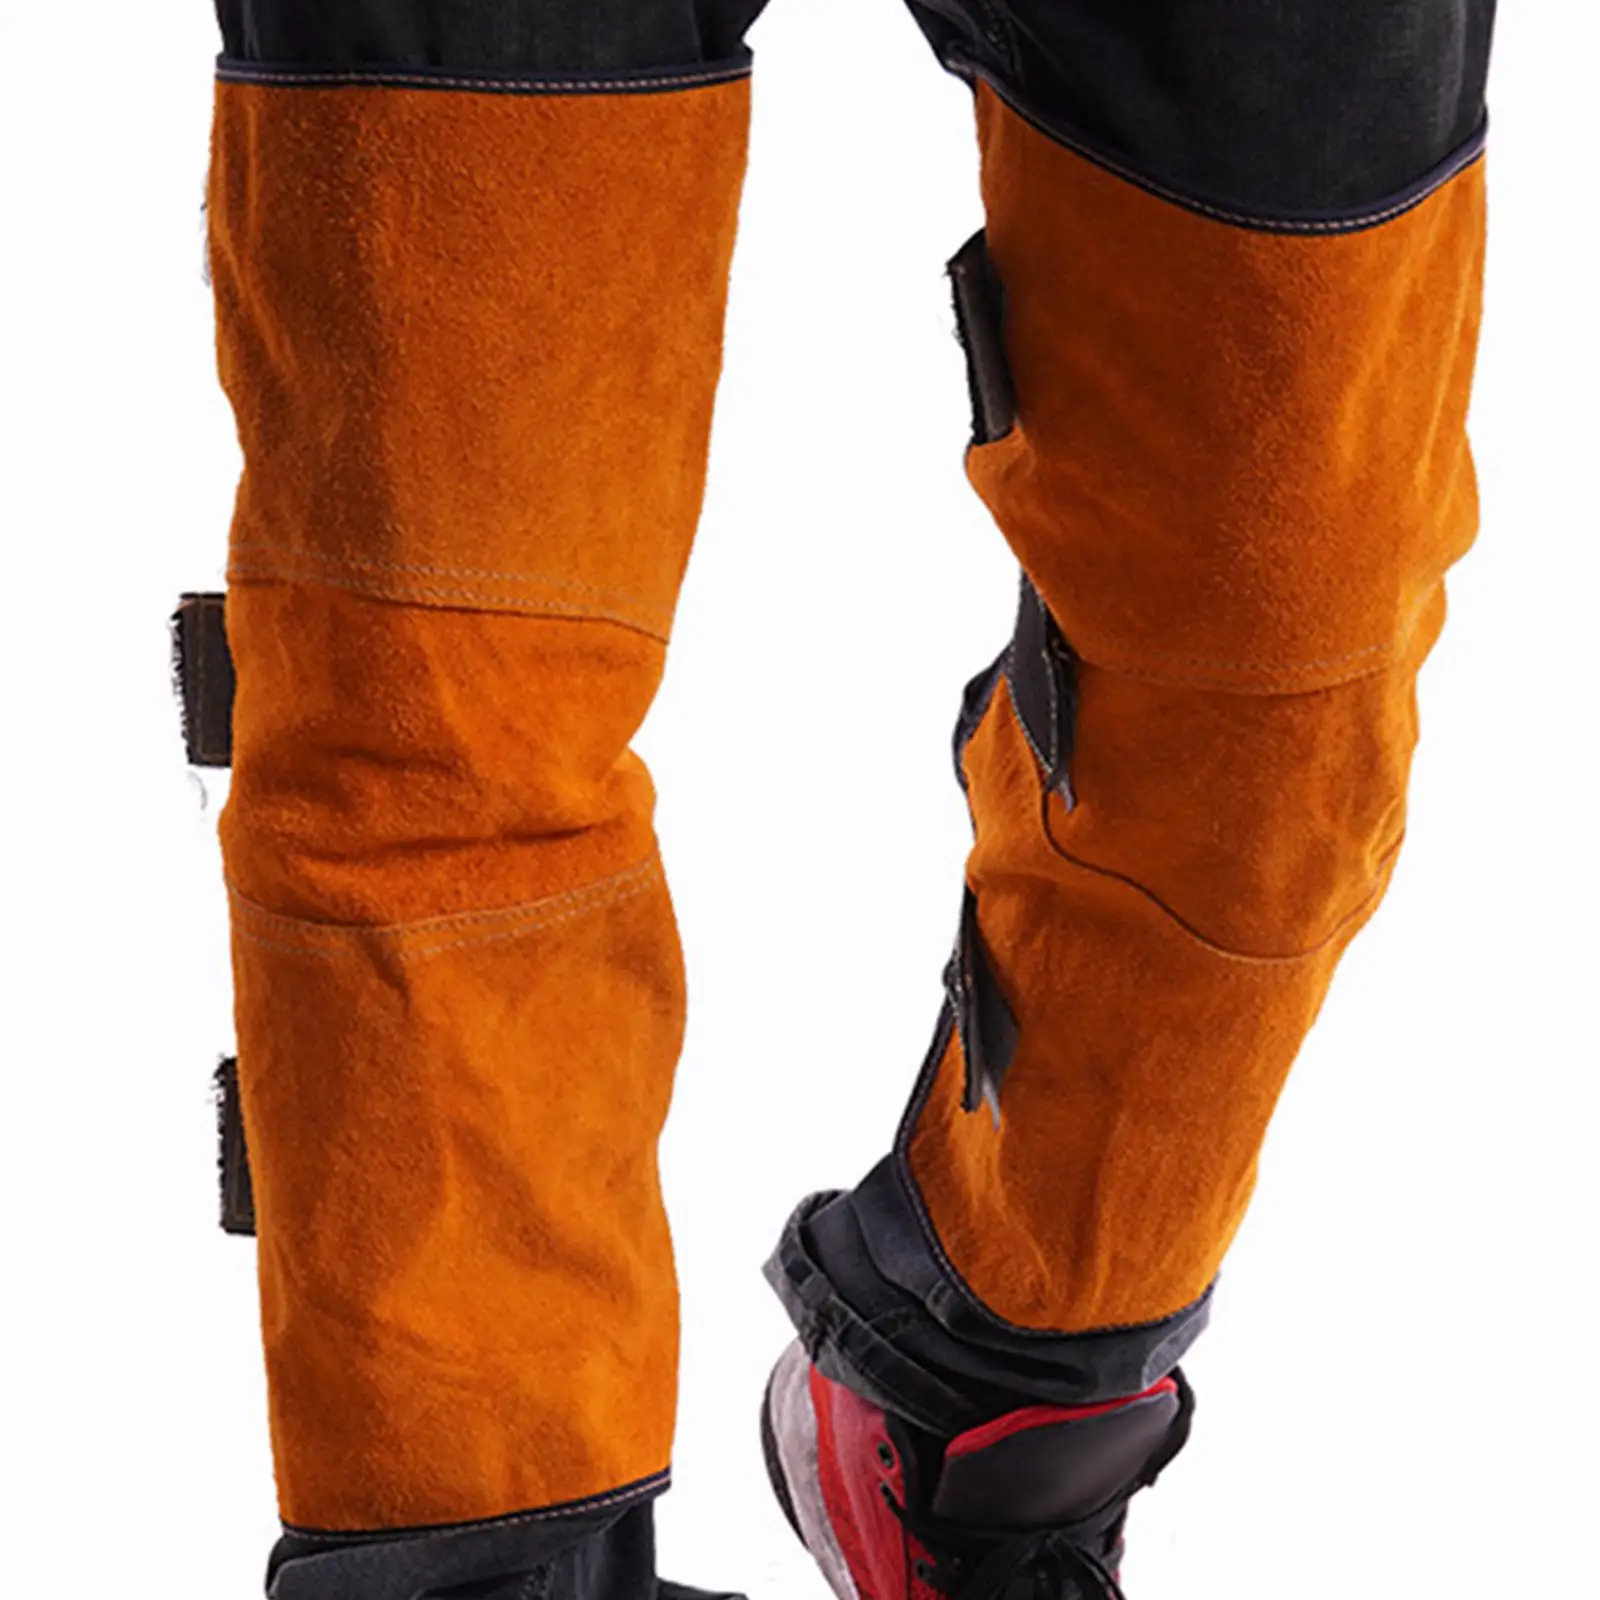 Welding Leg Covers for Welder Fireproof Abrasion Resistant Heat Resistant Anti Scald Leg Protection Knee Pads Leg Guards